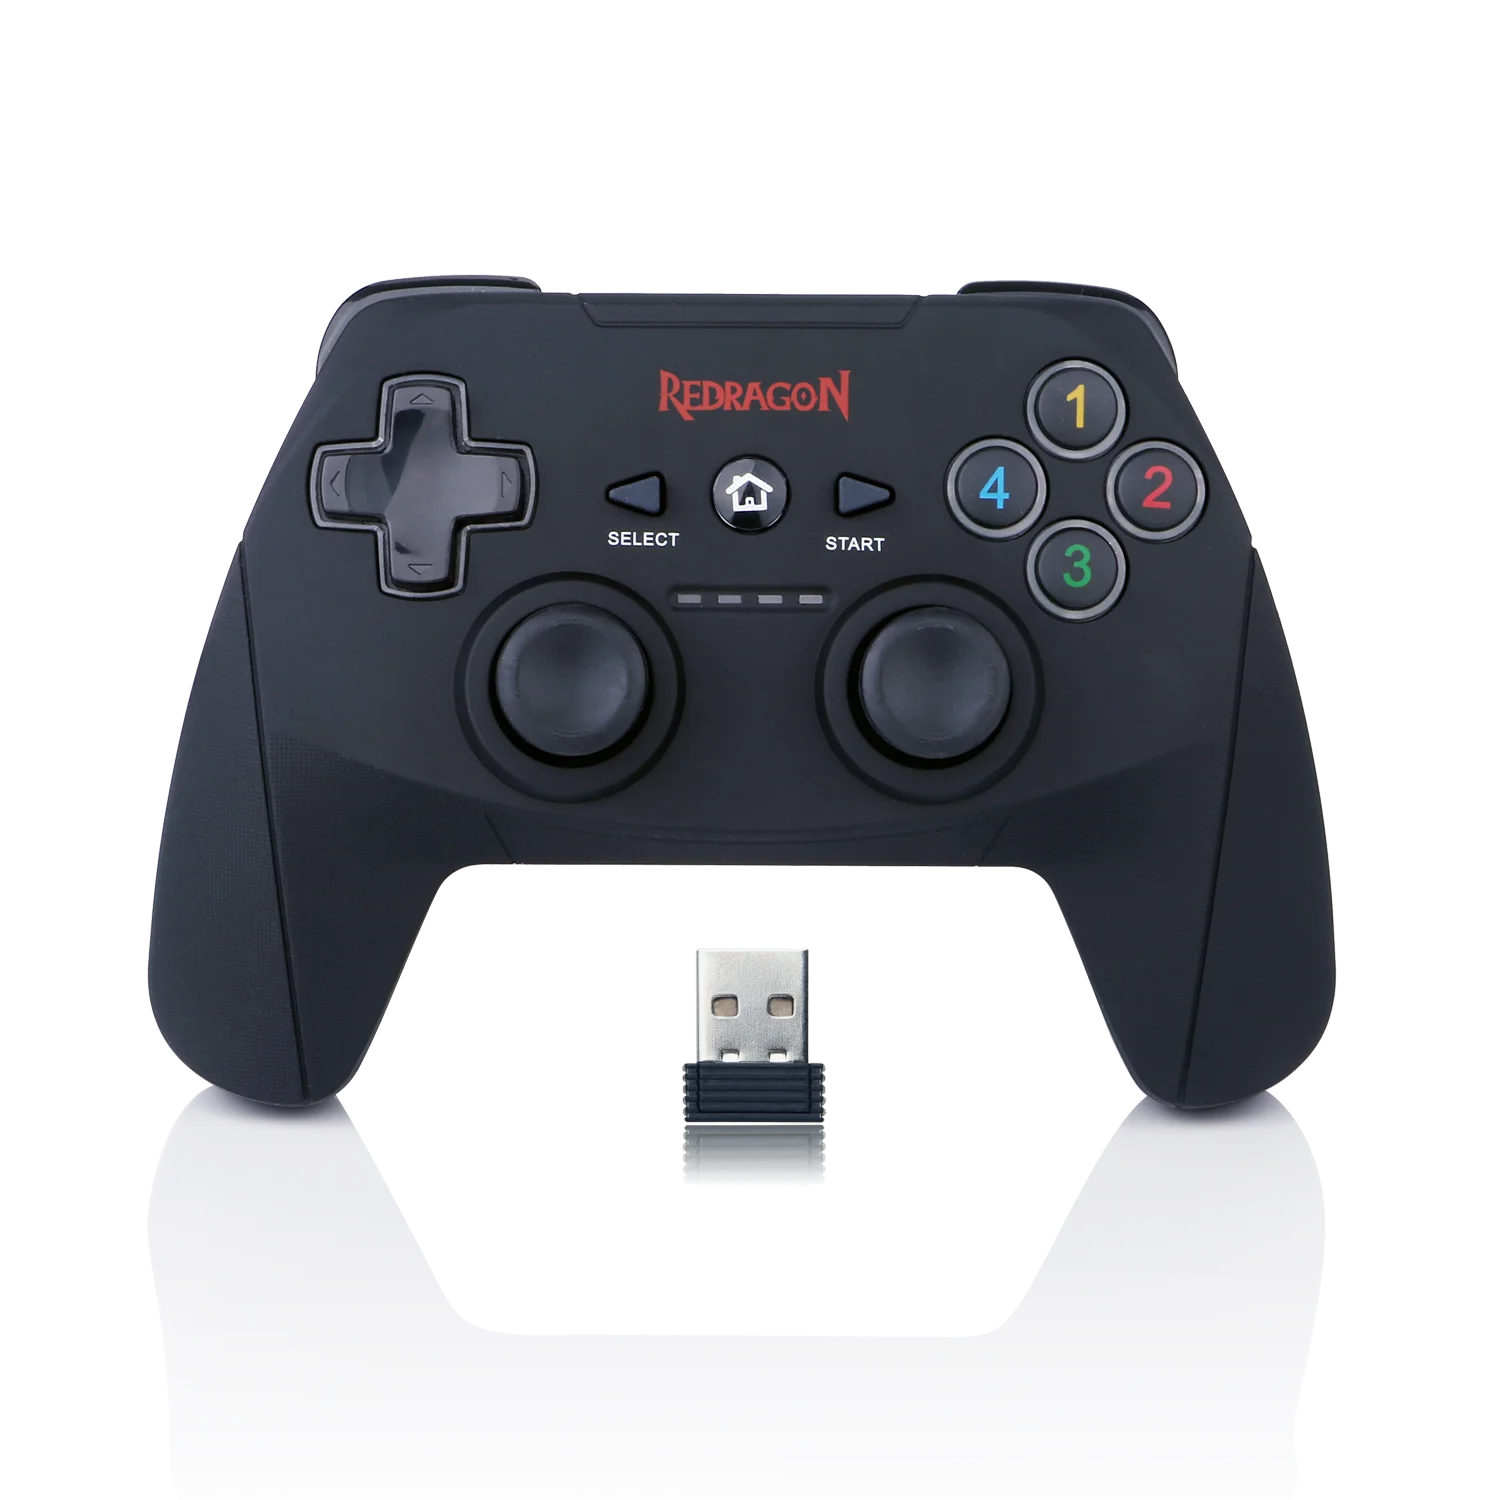 

Redragon G808 Gamepad, PC Game Controller, Joystick with Dual Vibration, Harrow, for Windows PC,PS3,Playstation,Android,Xbox 360